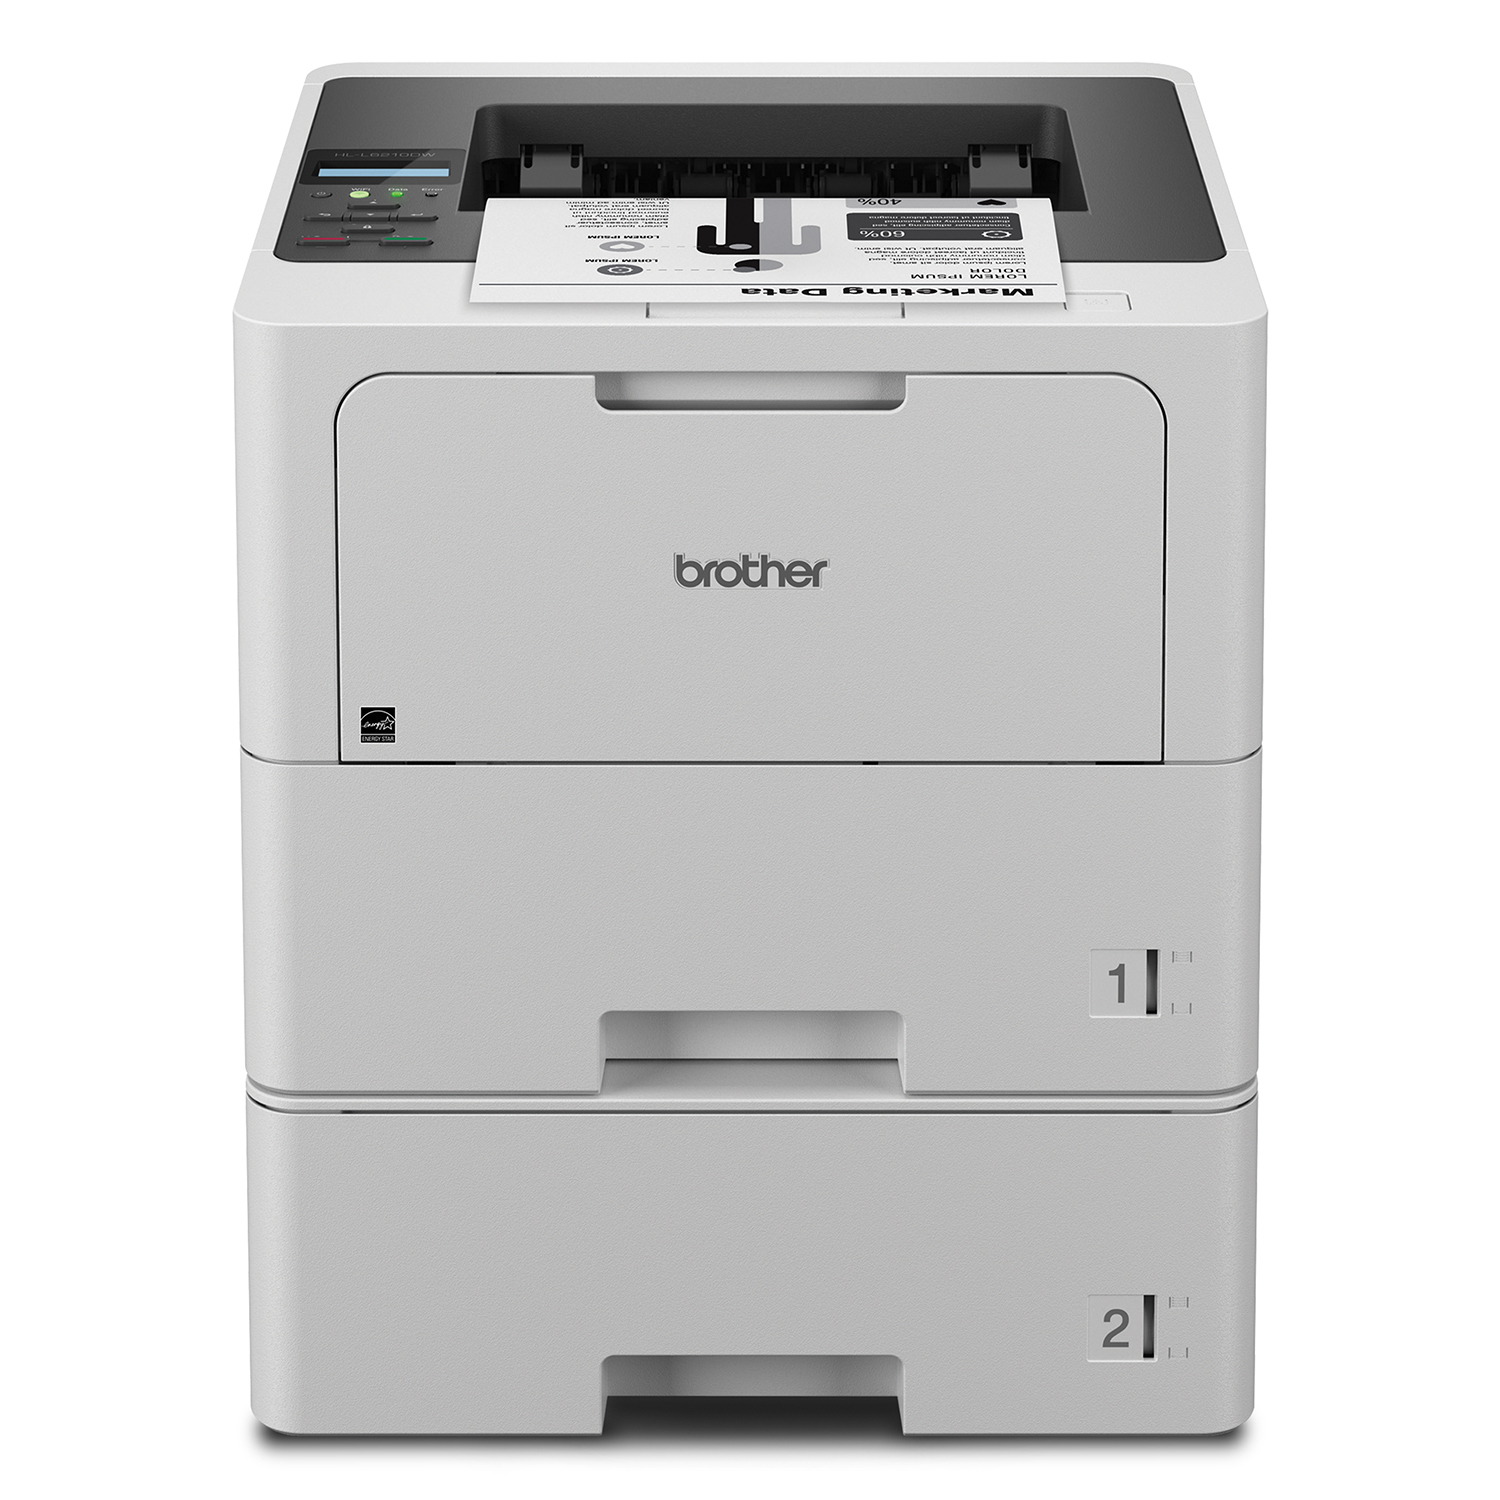 Photos - Printer Brother Business Monochrome Laser  with Dual Paper Trays, Wireless 